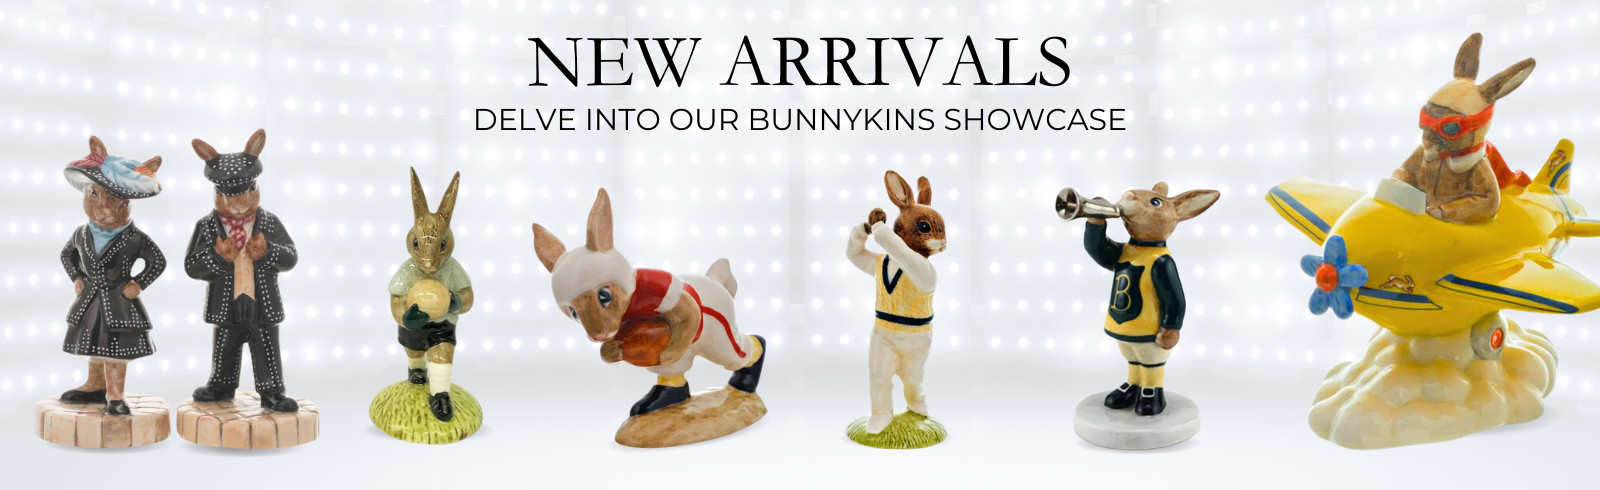 Celebrate International Rabbit Day with Pascoe & Company's Newest Bunnykins Collection!